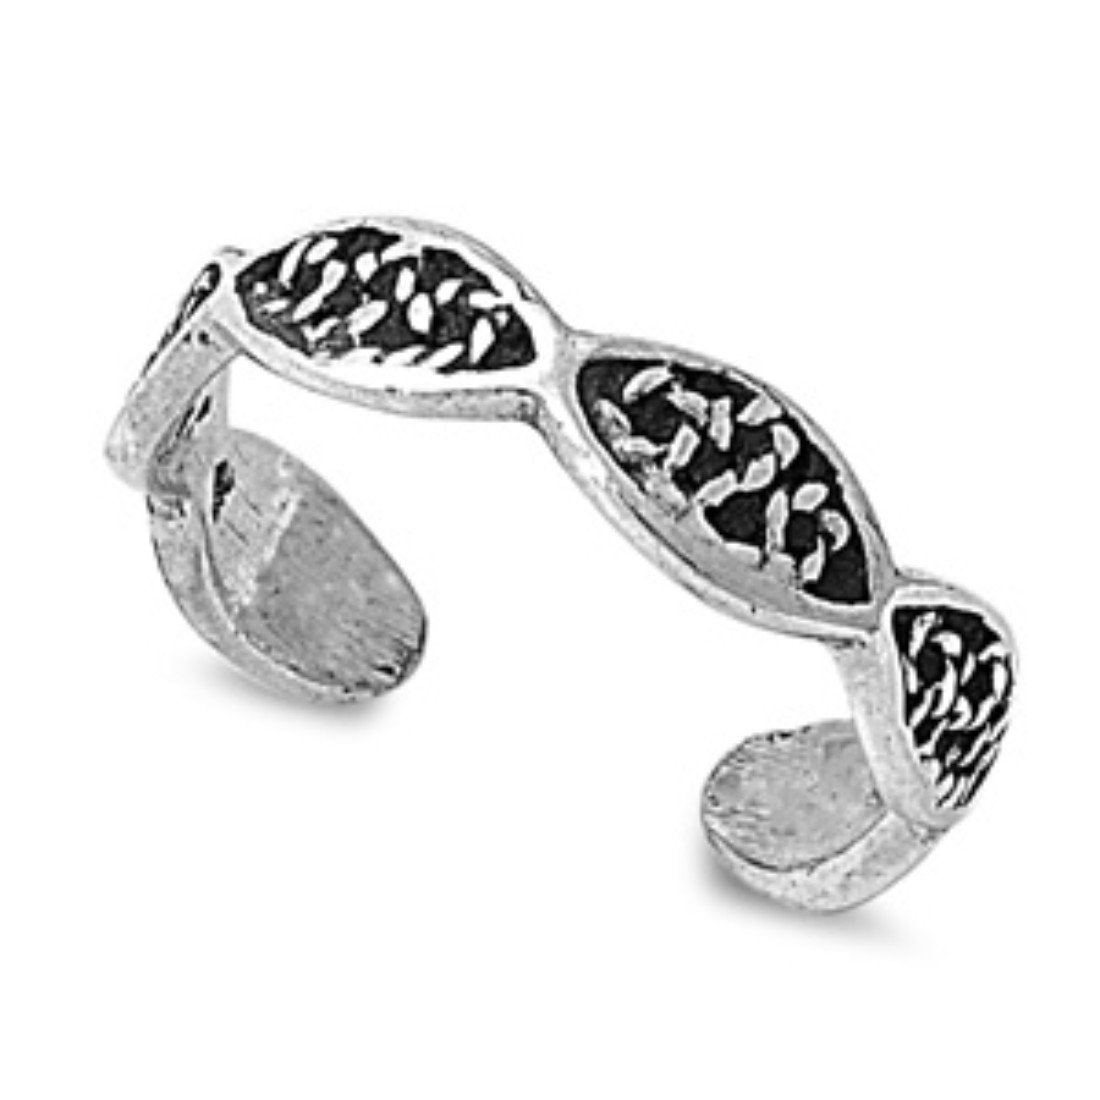 Filigree Adjustable Silver Toe Ring Band 925 Sterling Silver (4mm)